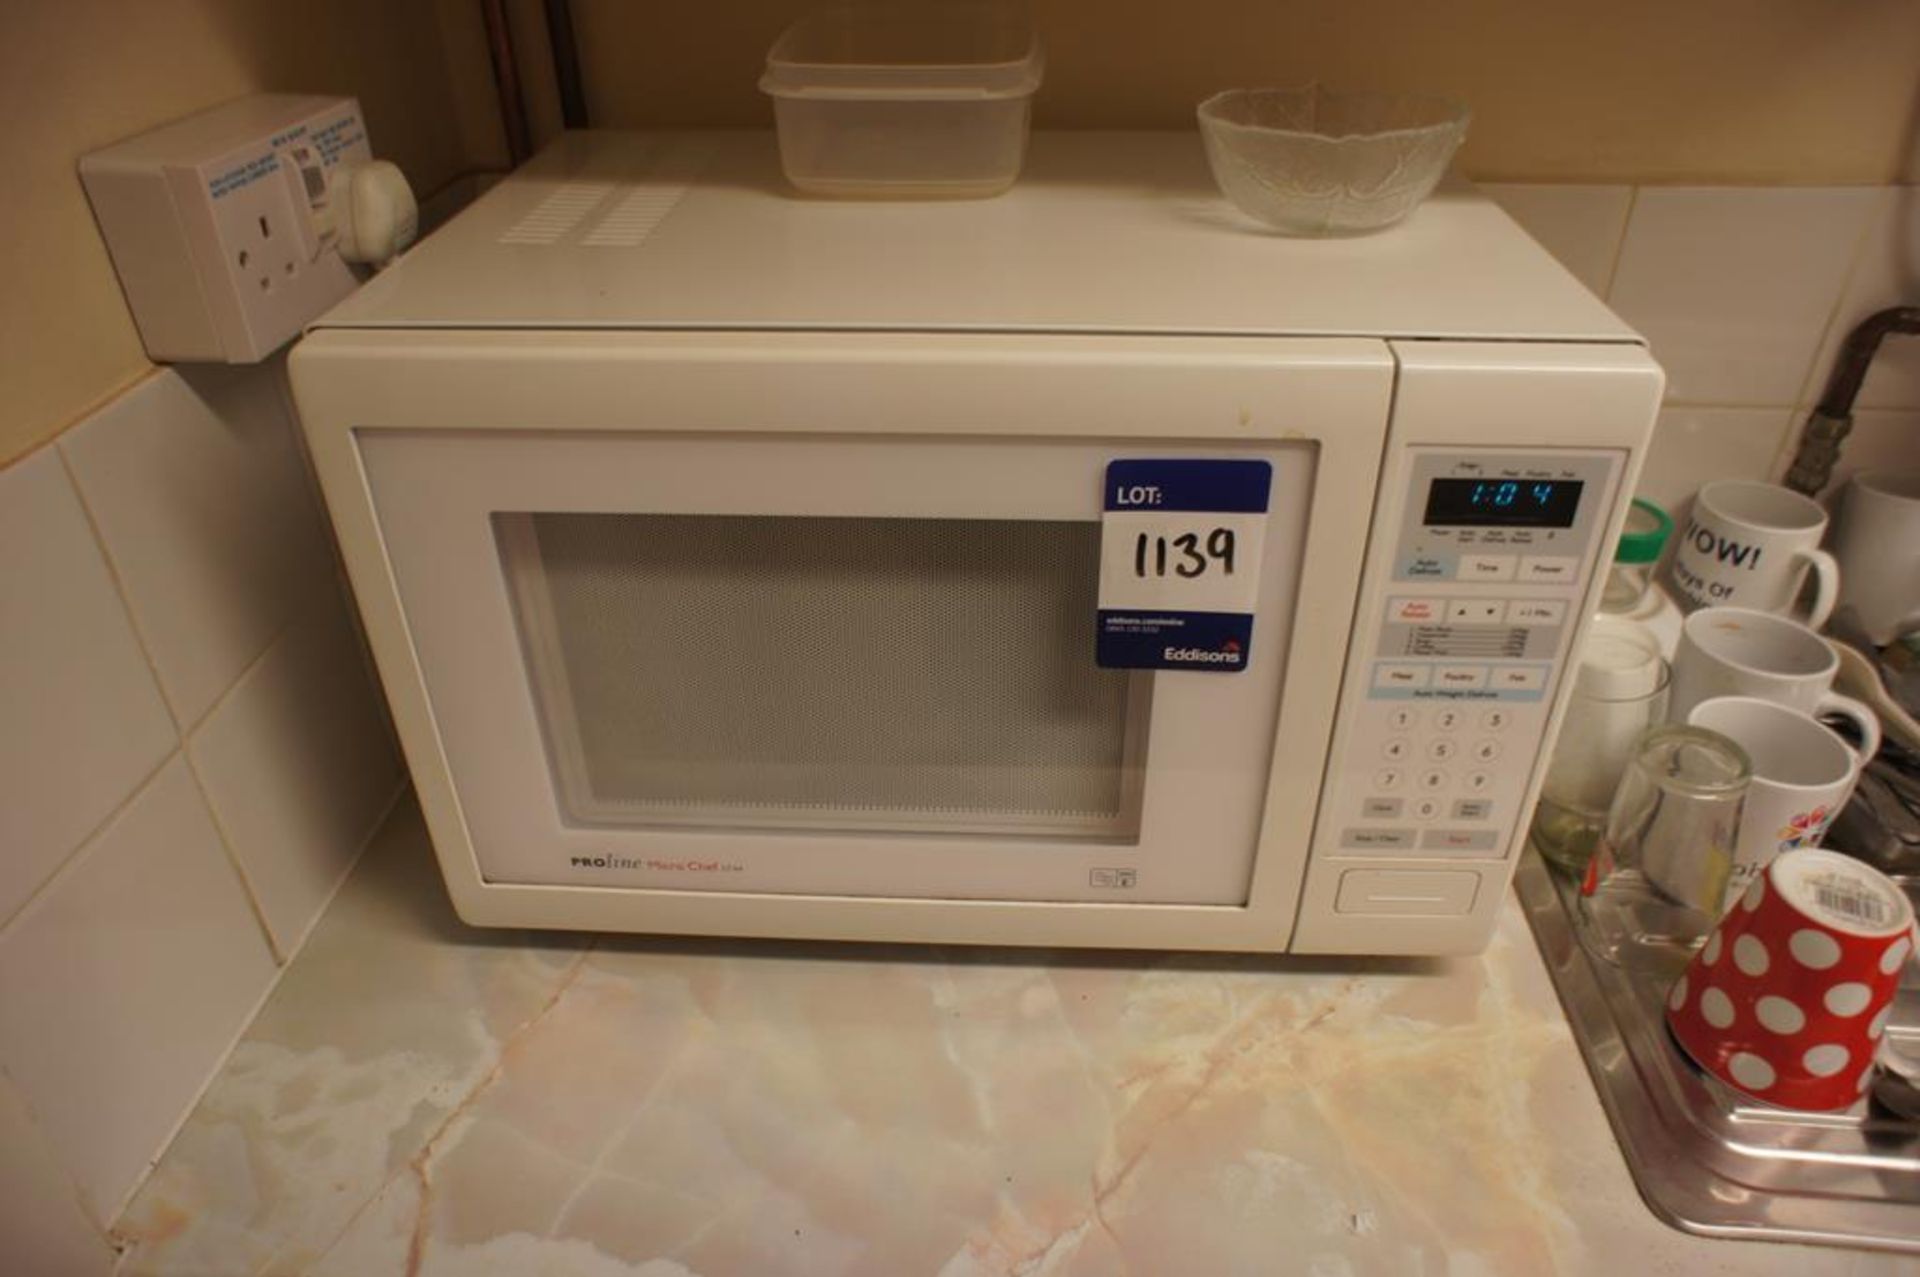 * Proline Microwave Oven Photographs are provided for example purposes only and do not represent the